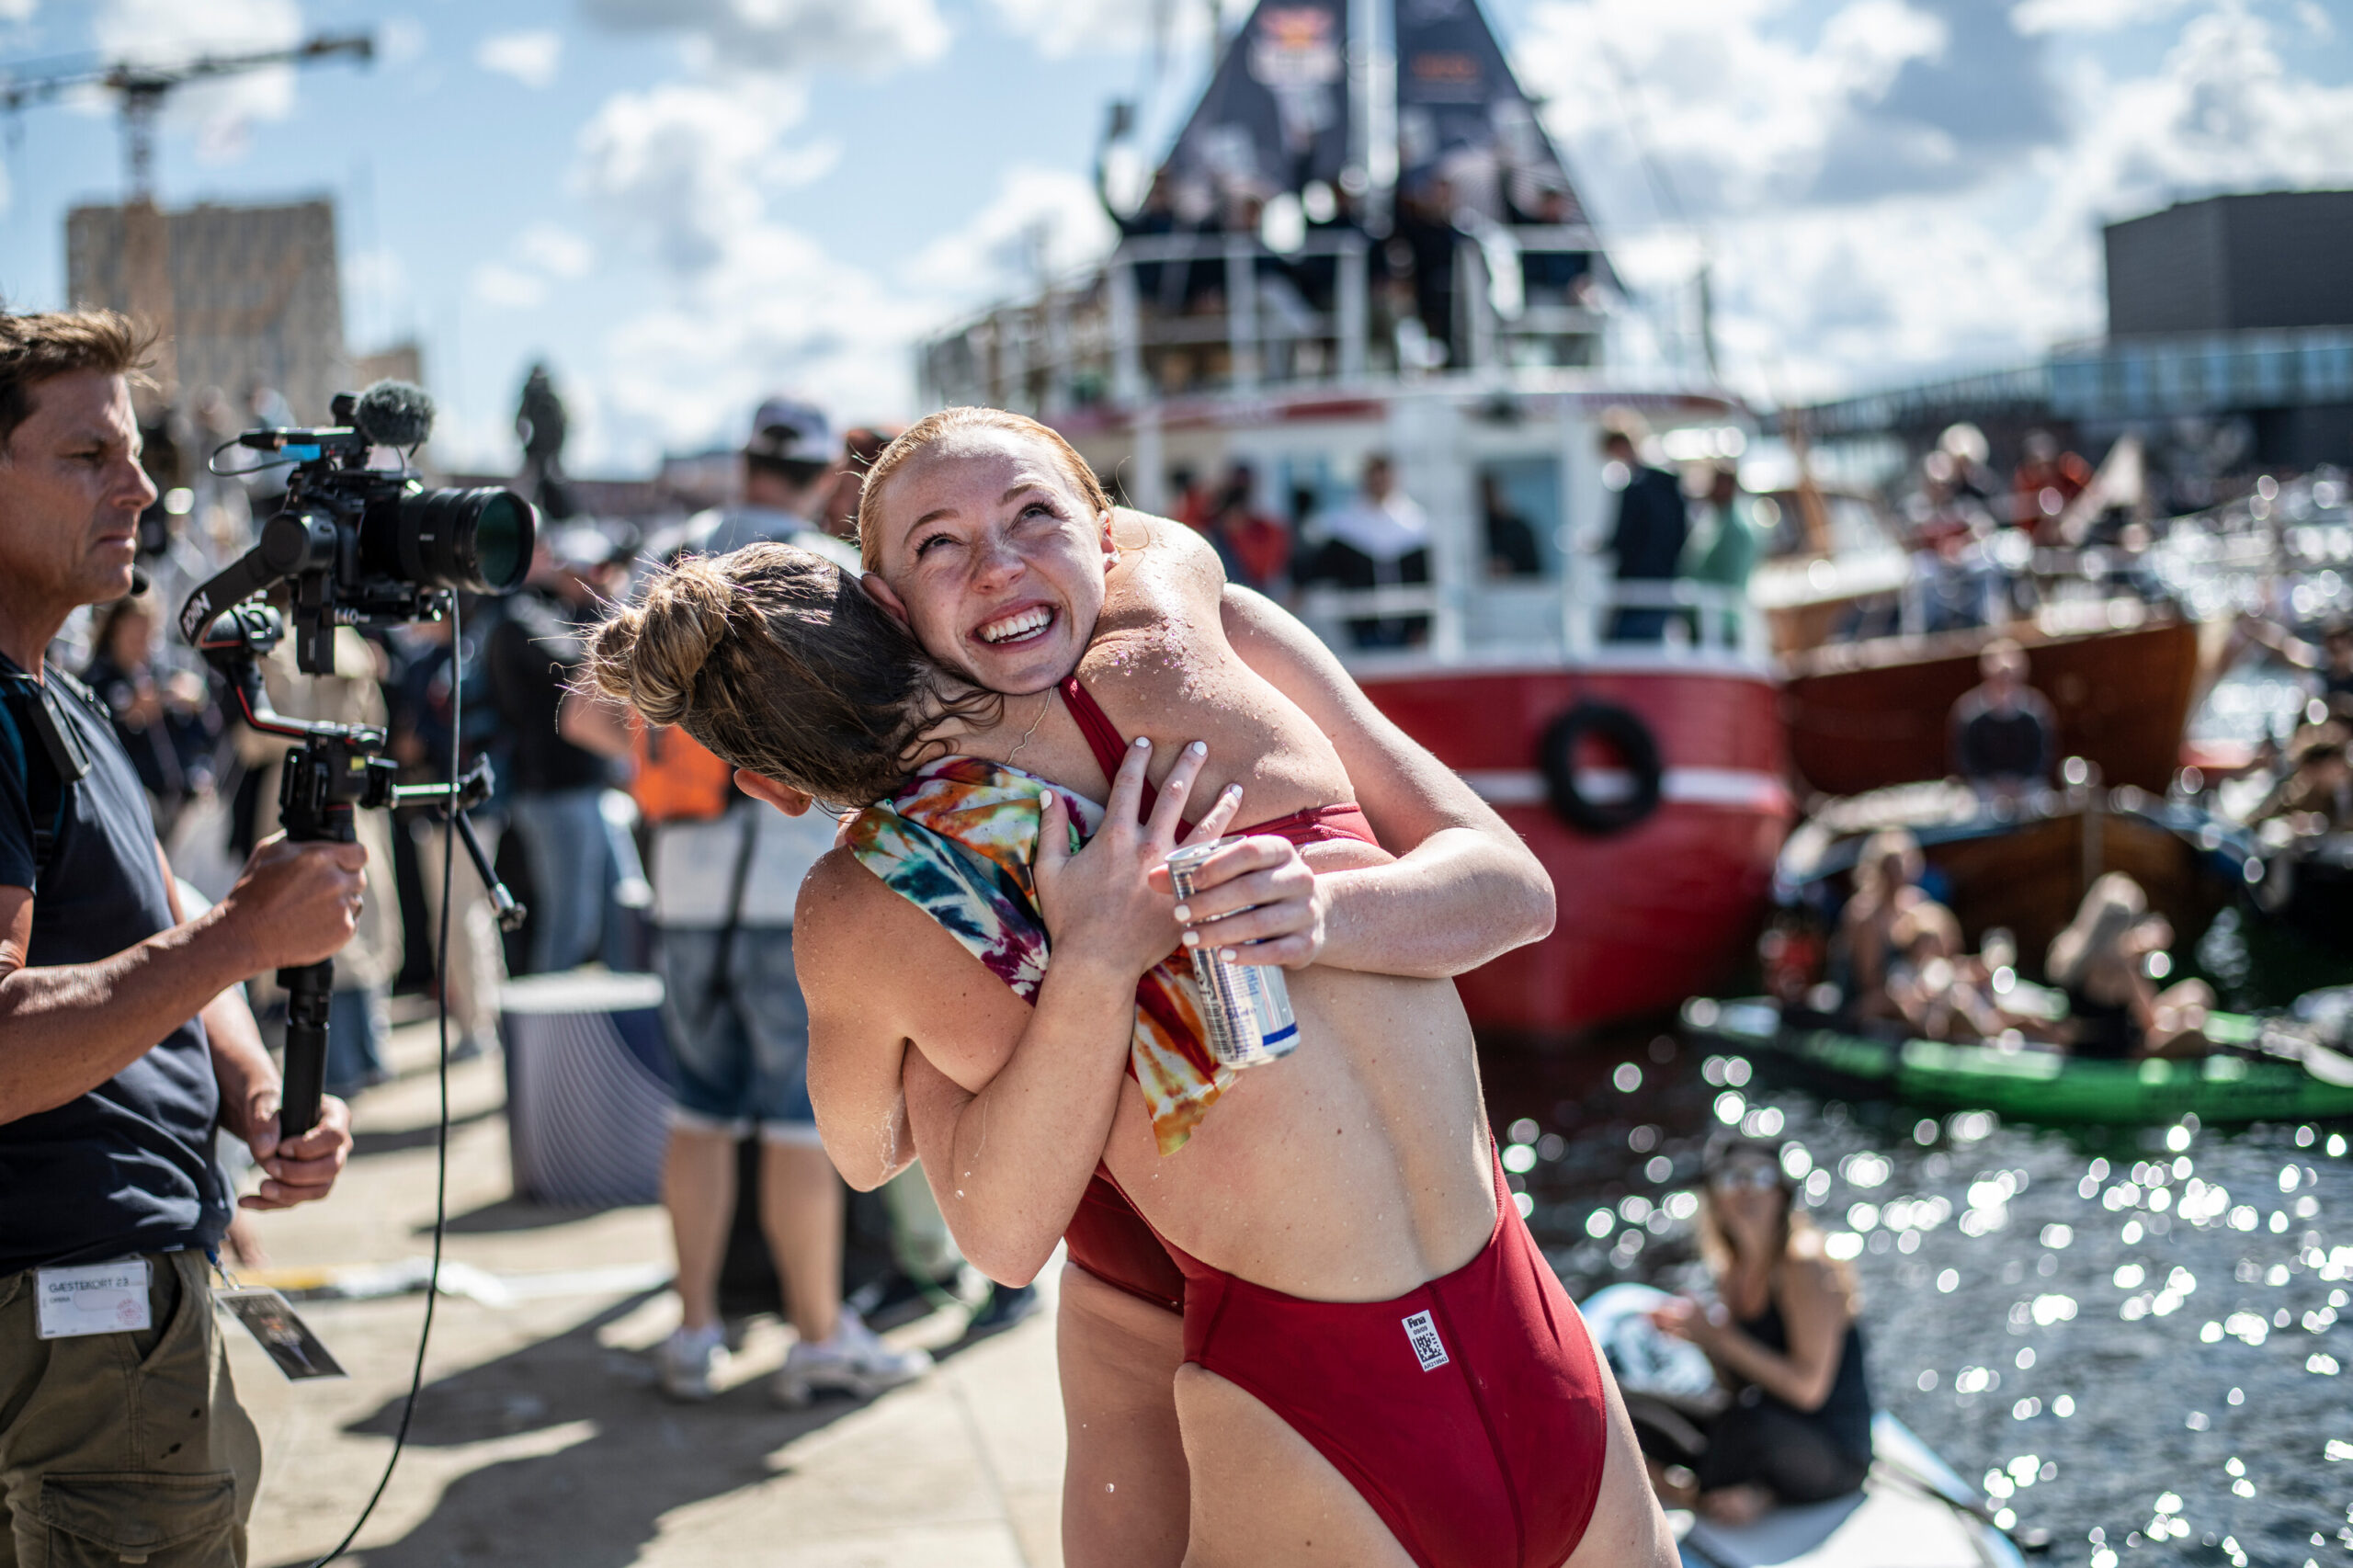 Carlson second, Harrison fifth, Macaulay sixth at Red Bull Cliff Diving World Series in Oslo